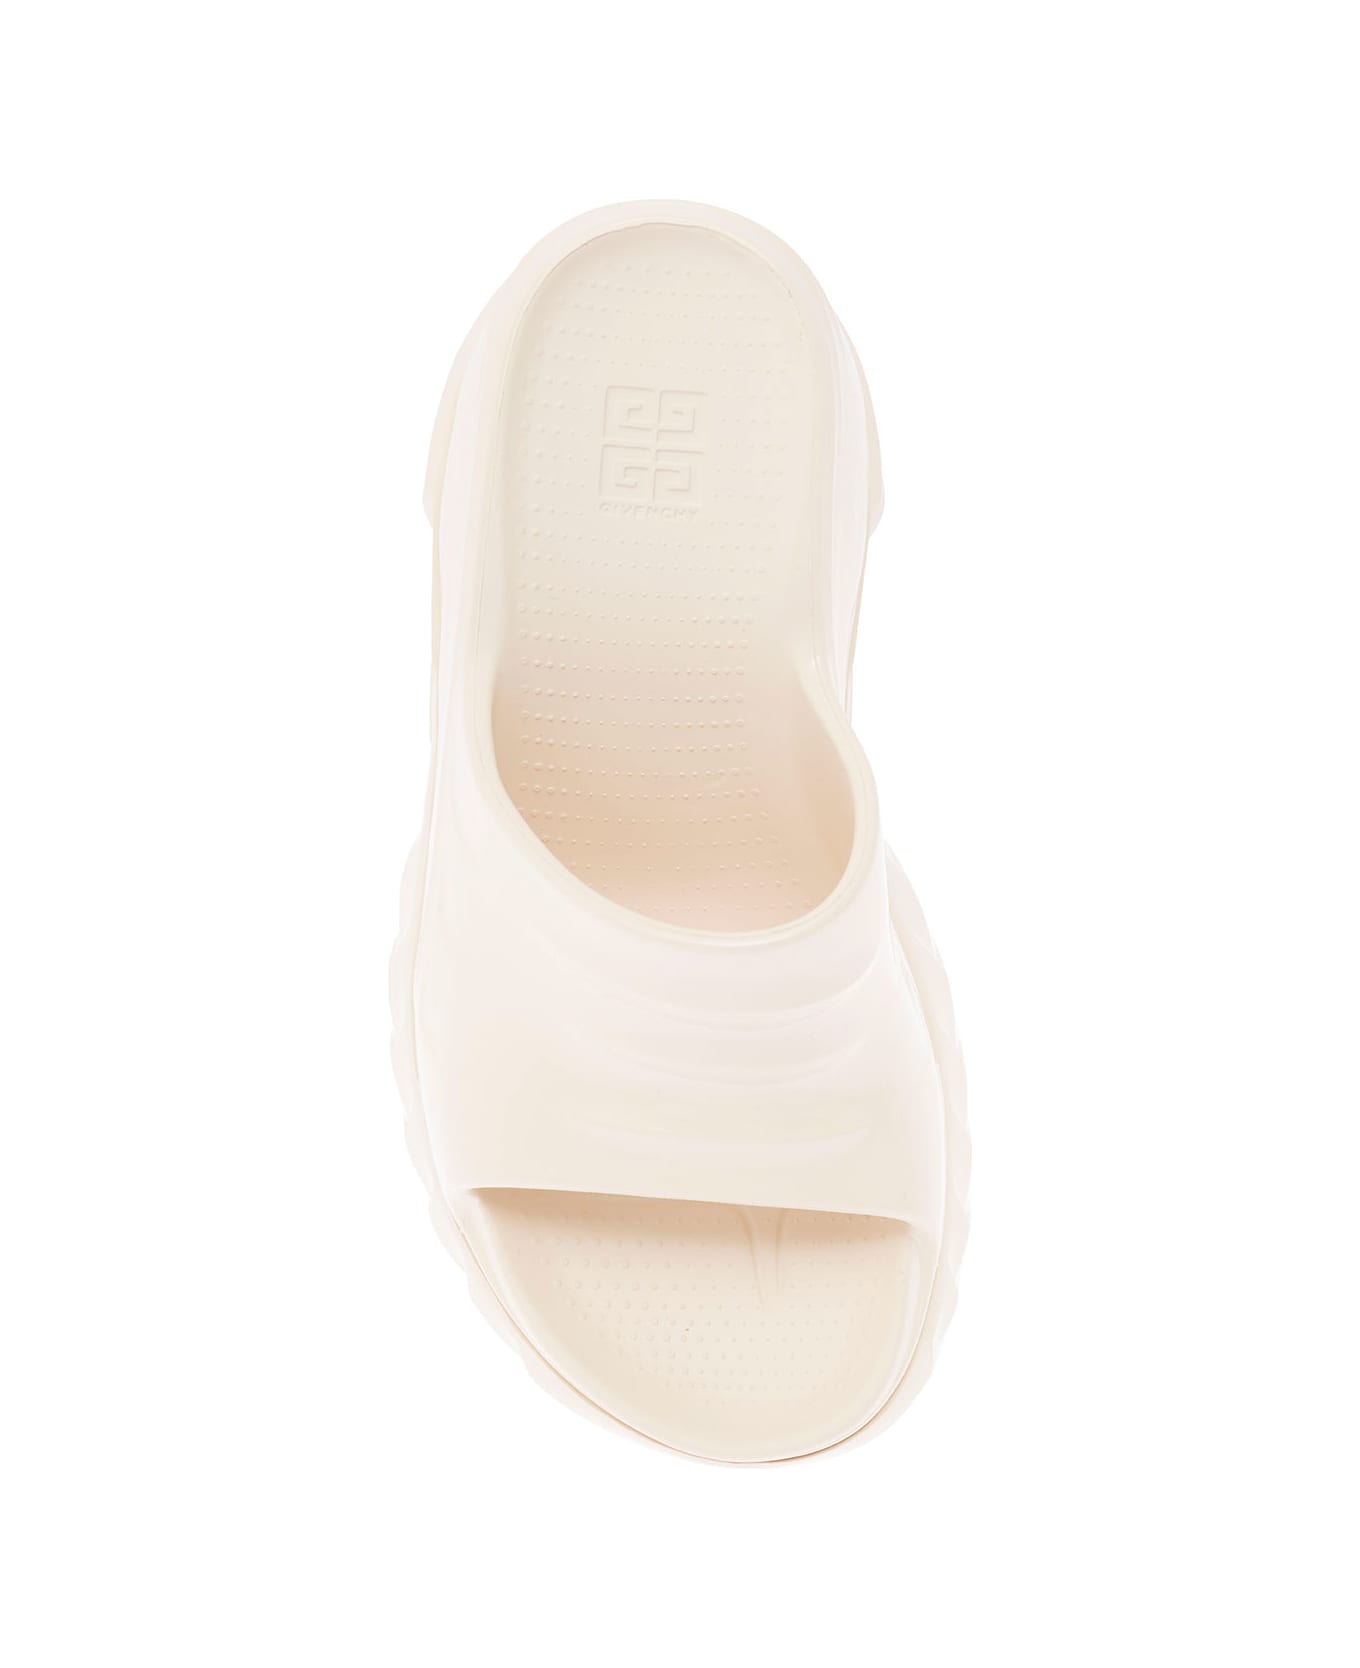 Givenchy Marshmallow Mules - White